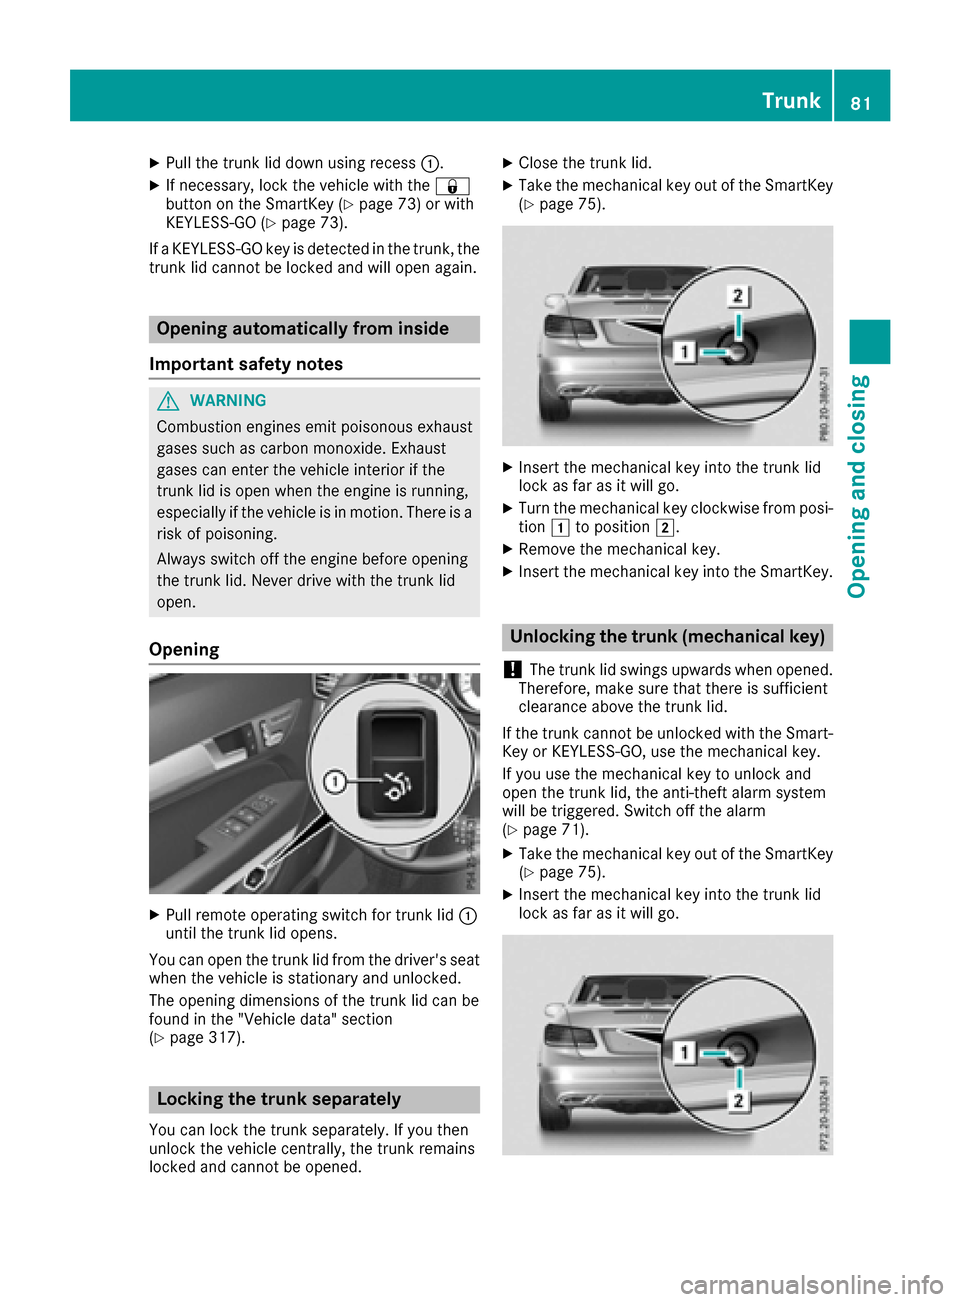 MERCEDES-BENZ E-Class CABRIOLET 2017 A207 Owners Manual XPull the trunk lid down using recess:.
XIf necessary, lock the vehicle with the &
button on the SmartKey (Ypage 73) or with
KEYLESS-GO (Ypage 73).
If a KEYLESS-GO key is detected in the trunk, the
tr